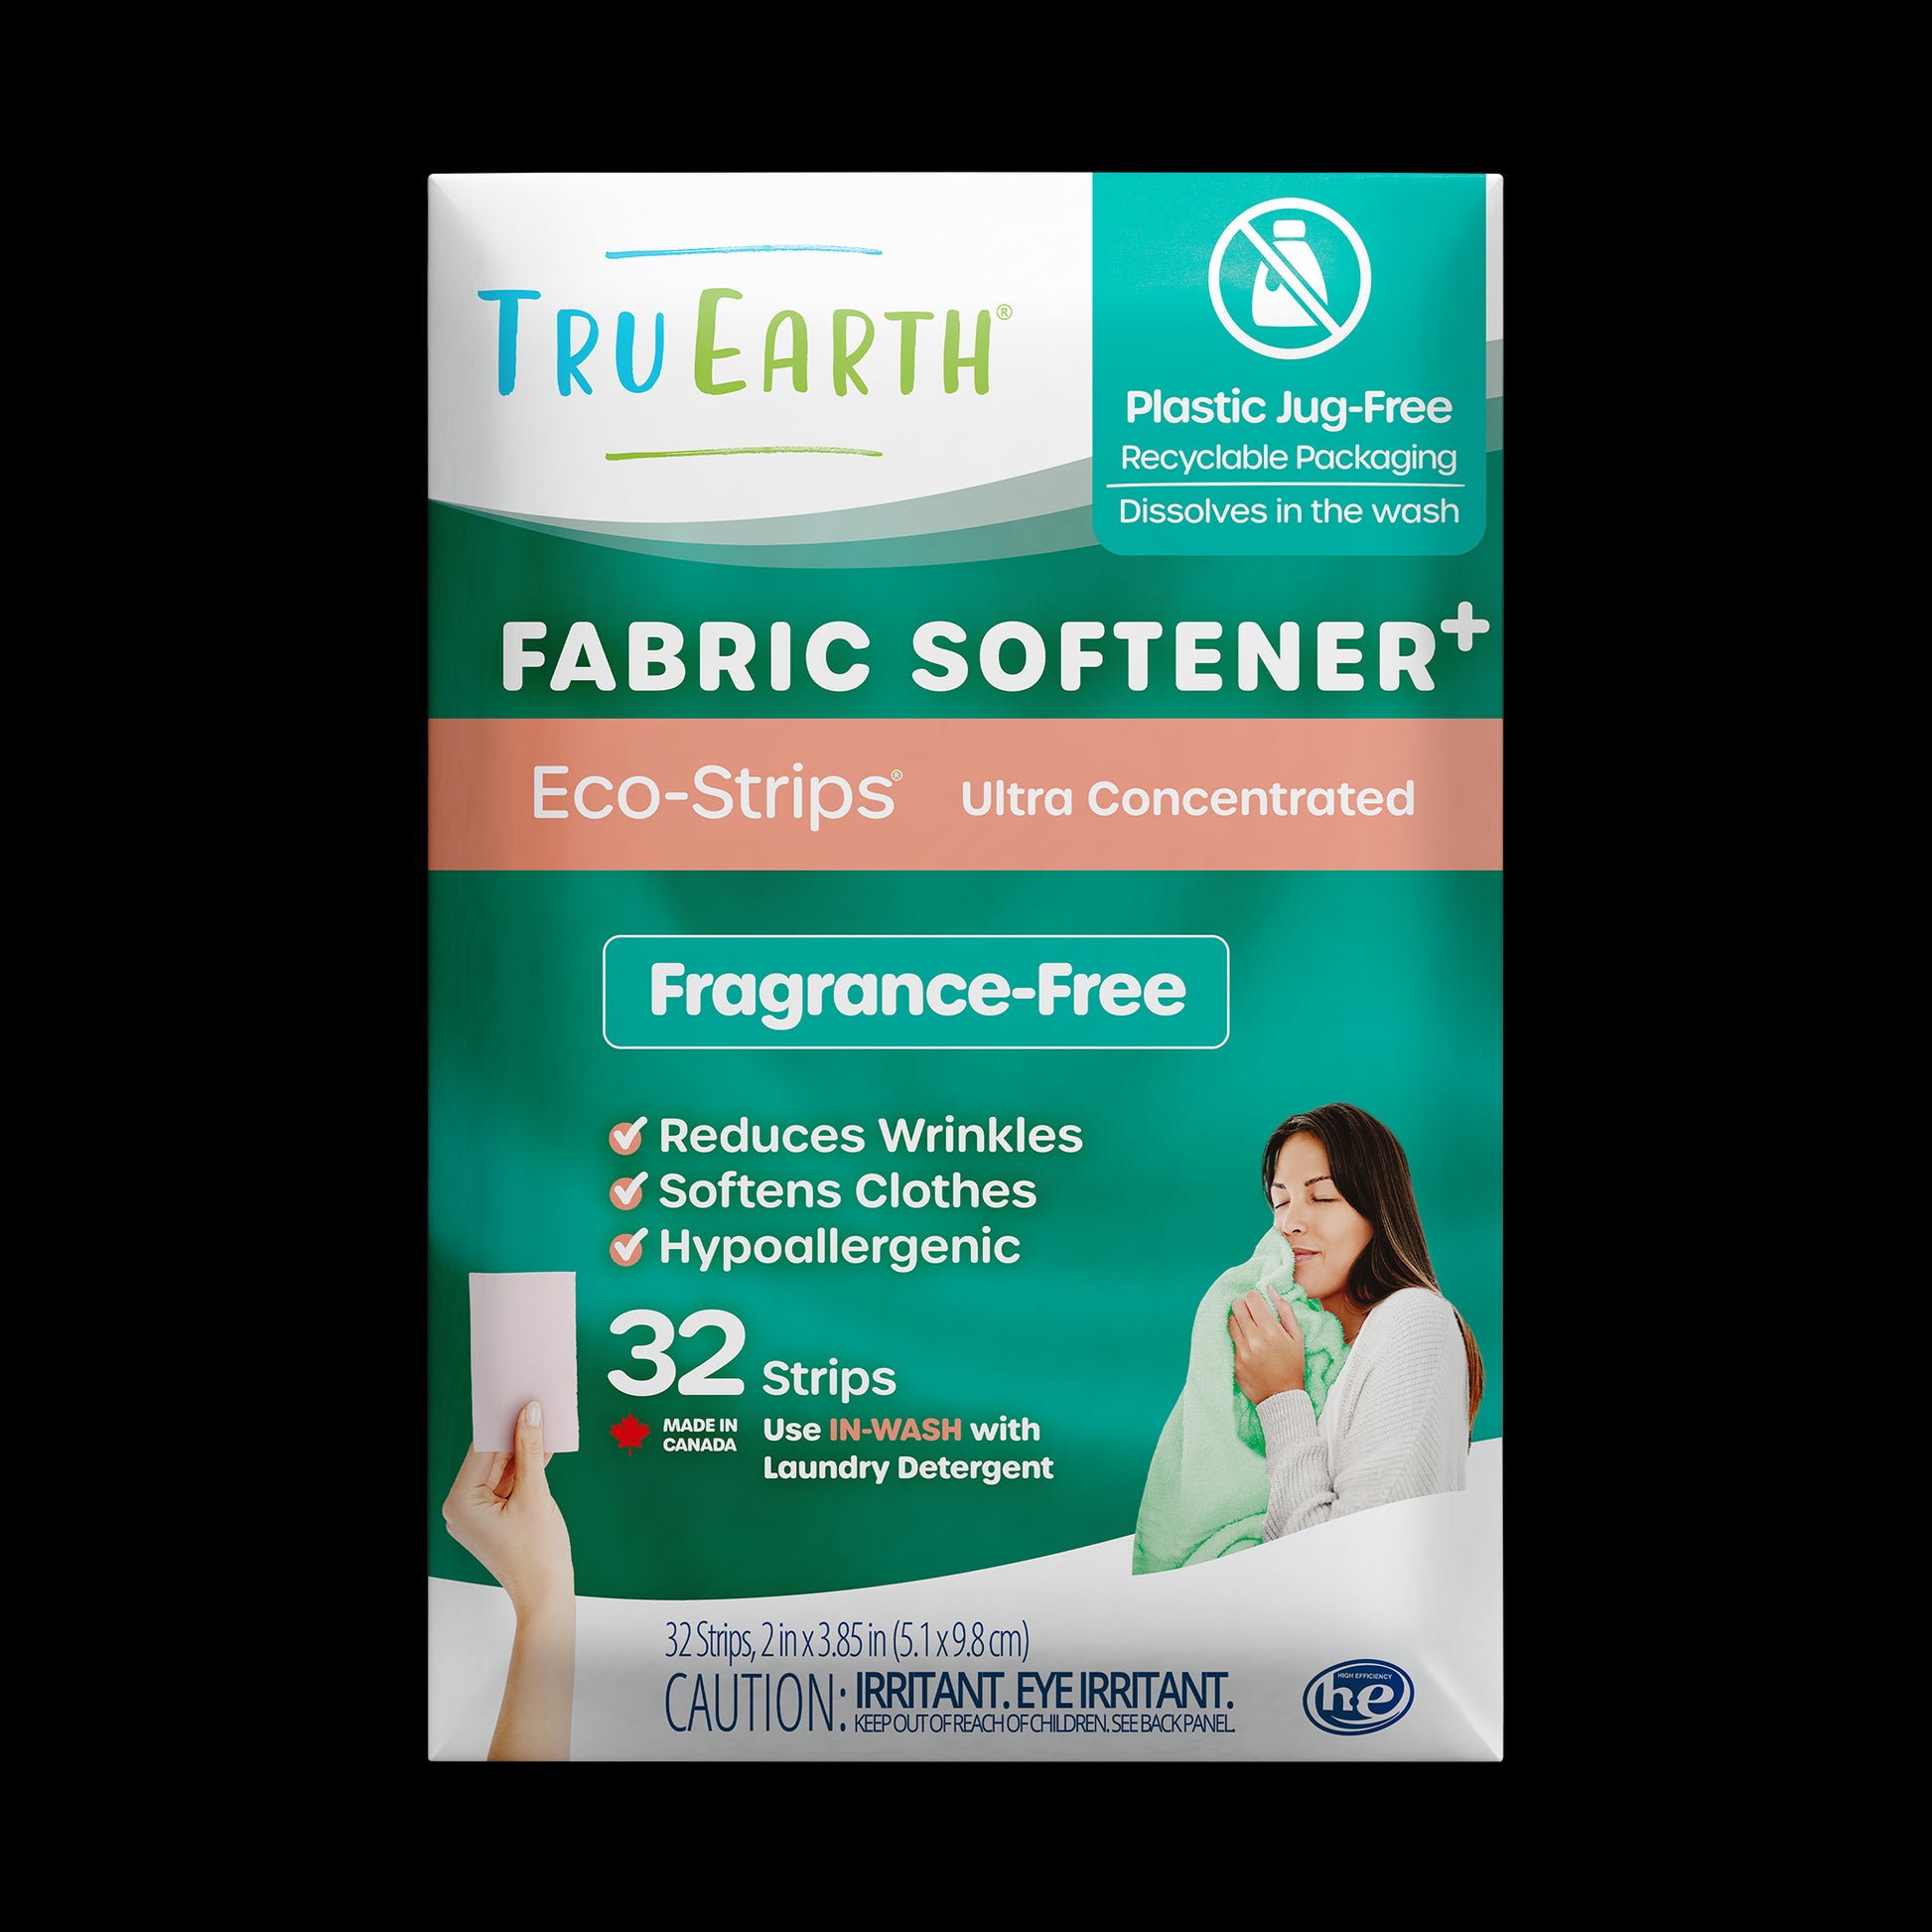 TruEarth Fabric Softener Fragrance-Free Front of Package